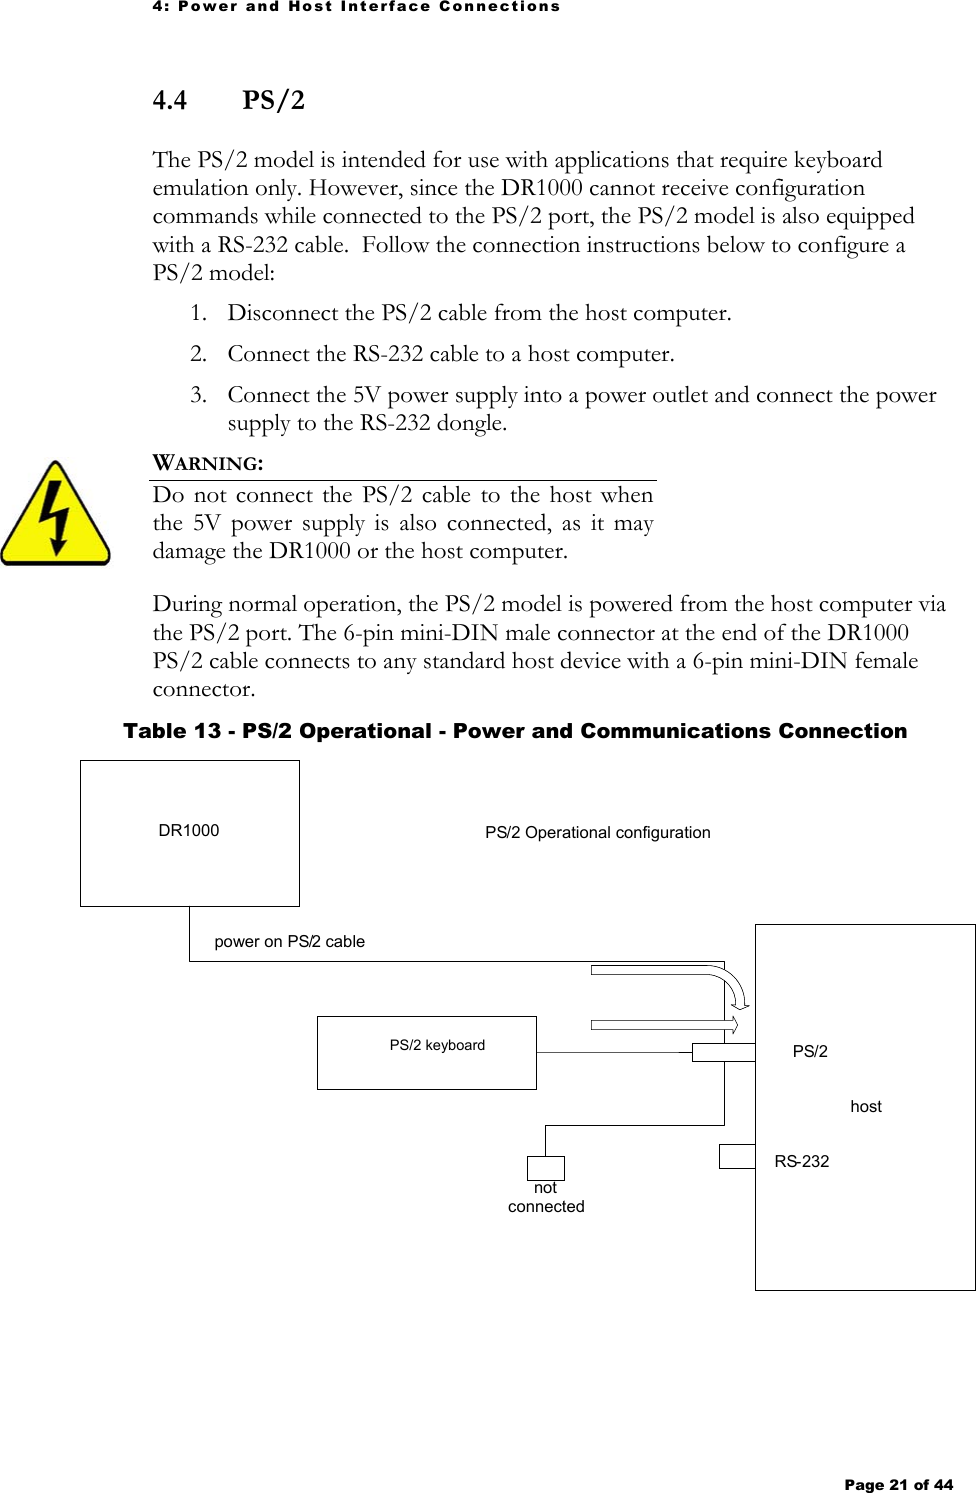 4: Power and Host Interface Connections Page 21 of 44   4.4  PS/2 The PS/2 model is intended for use with applications that require keyboard emulation only. However, since the DR1000 cannot receive configuration commands while connected to the PS/2 port, the PS/2 model is also equipped with a RS-232 cable.  Follow the connection instructions below to configure a PS/2 model: 1. Disconnect the PS/2 cable from the host computer. 2. Connect the RS-232 cable to a host computer. 3. Connect the 5V power supply into a power outlet and connect the power supply to the RS-232 dongle. WARNING:   Do not connect the PS/2 cable to the host when the 5V power supply is also connected, as it may damage the DR1000 or the host computer.   During normal operation, the PS/2 model is powered from the host computer via the PS/2 port. The 6-pin mini-DIN male connector at the end of the DR1000 PS/2 cable connects to any standard host device with a 6-pin mini-DIN female connector.   Table 13 - PS/2 Operational - Power and Communications Connection  PS/2 Operational configuration DR1000 power on PS / 2 cablehostPS / 2RS - 232not connectedPS/2 keyboard 